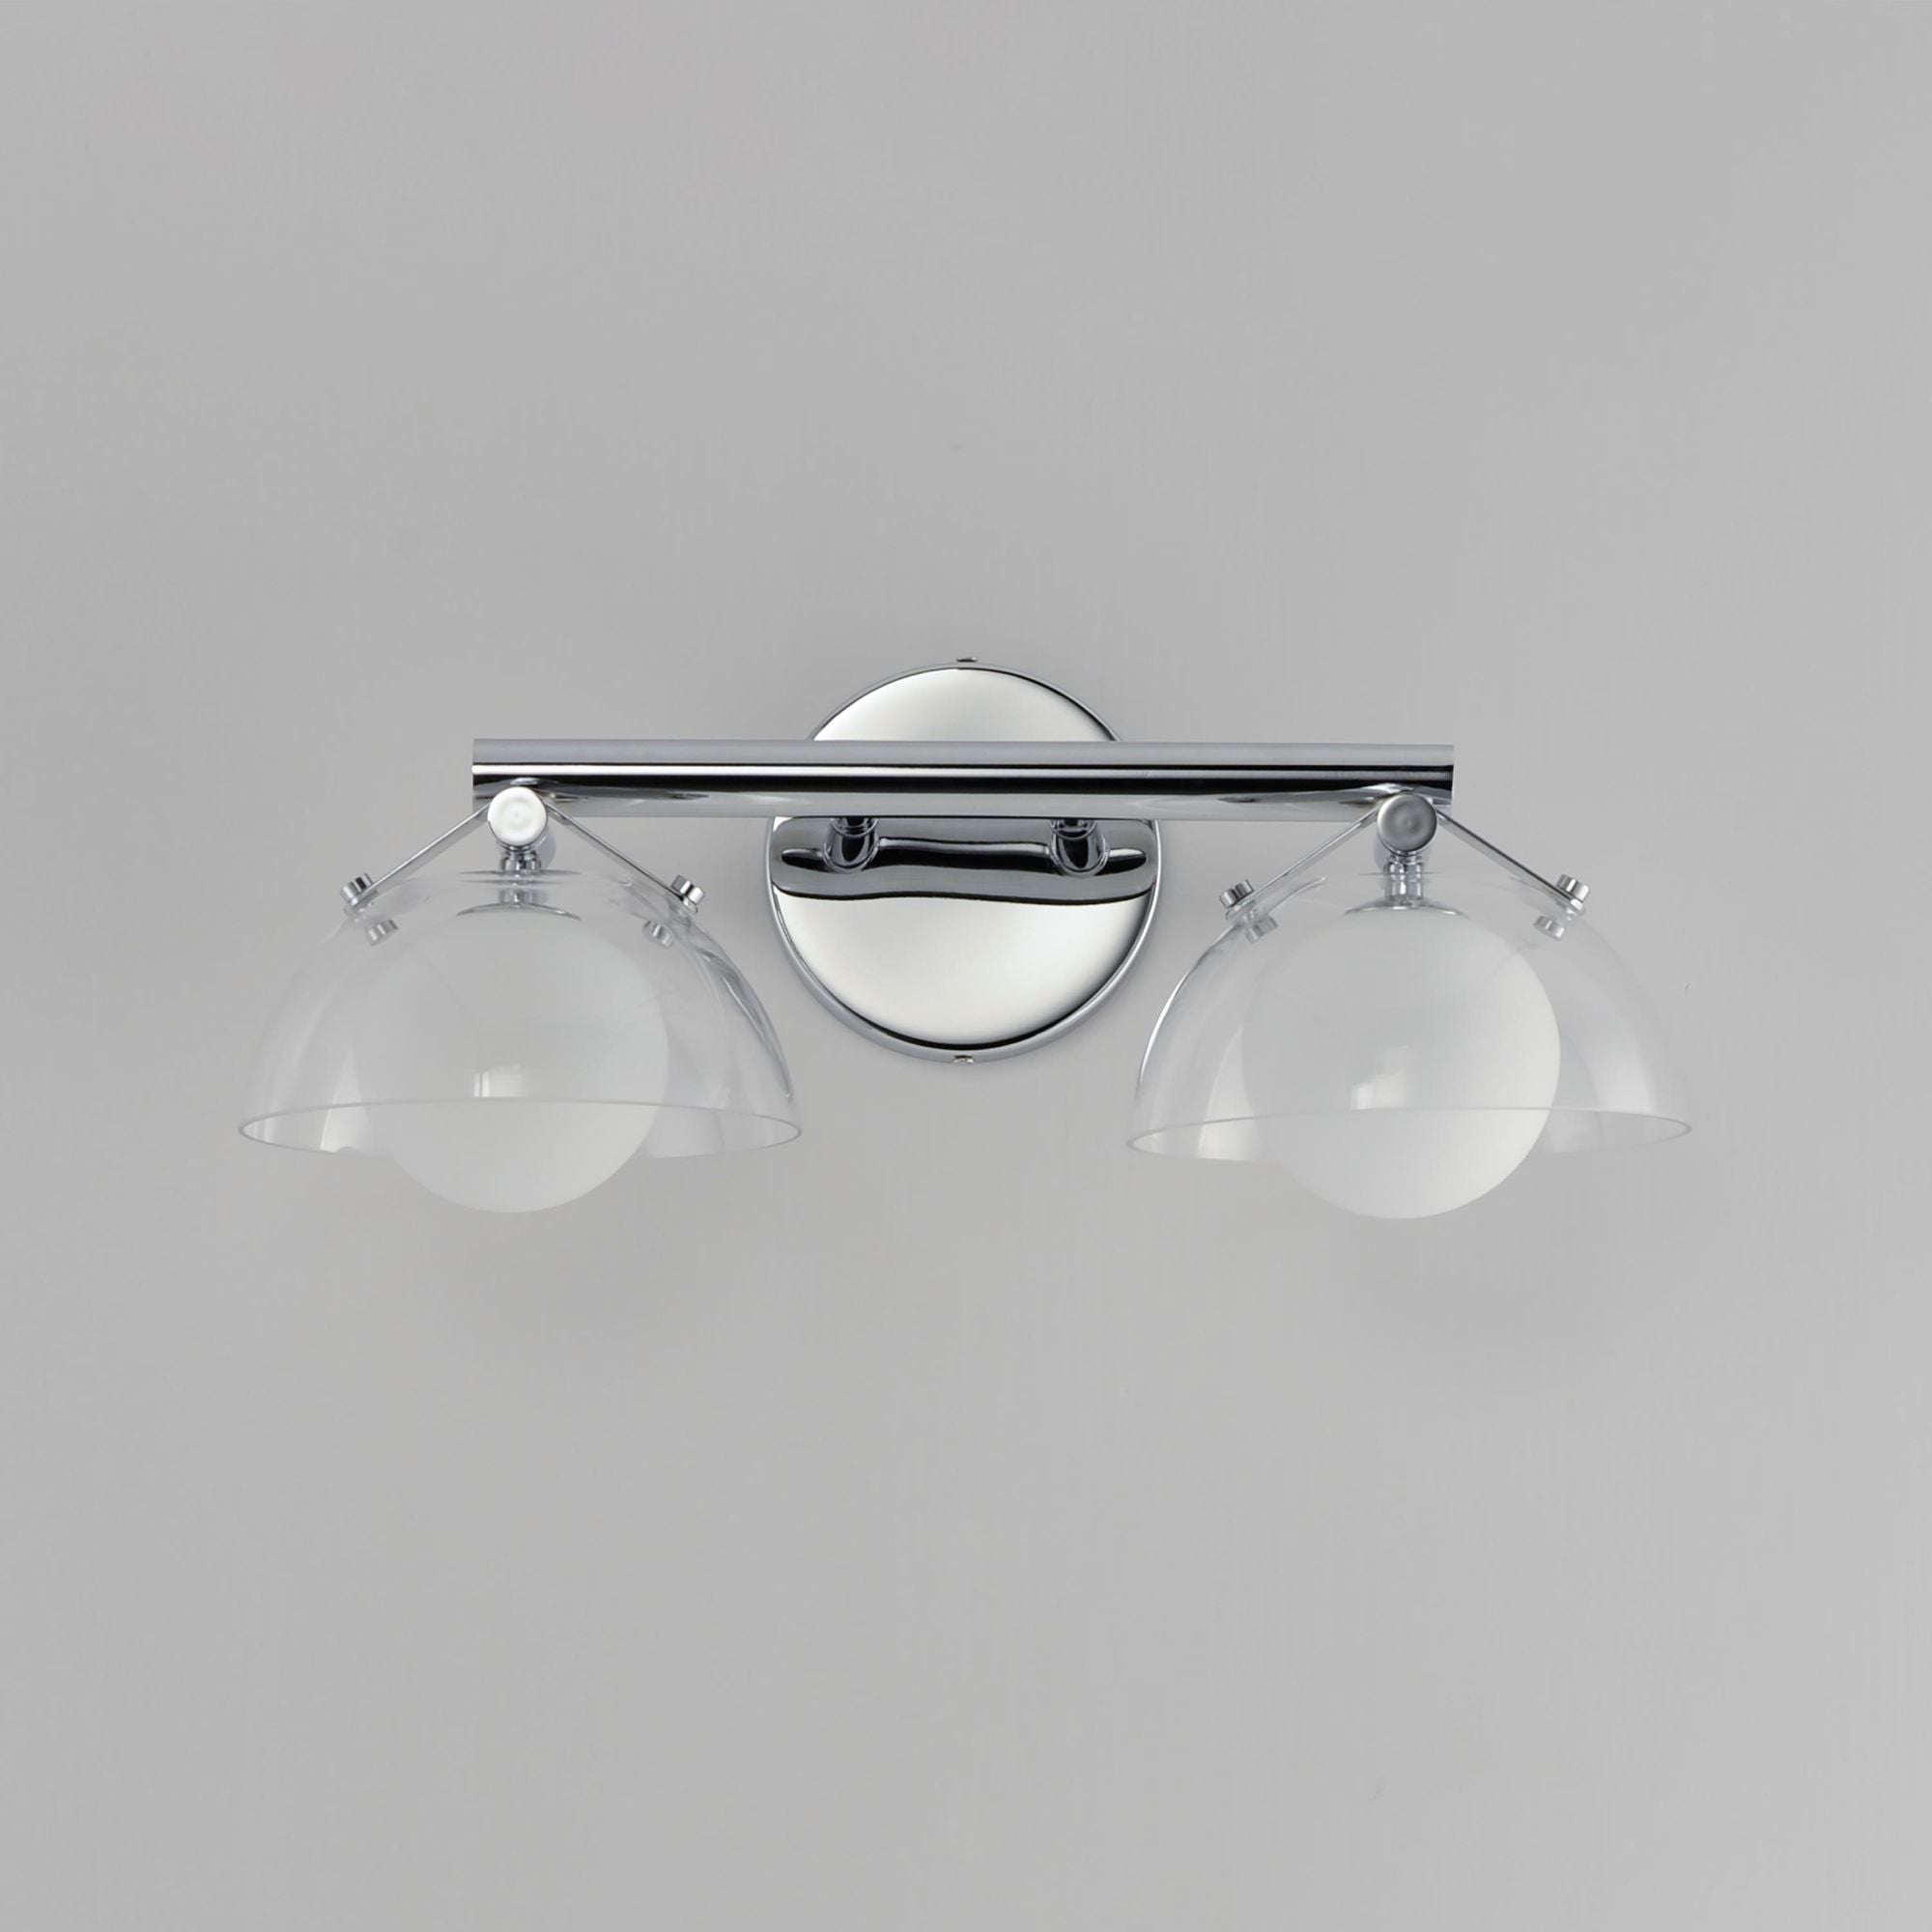 Studio M SM31002CLPC Domain 2-Light Wall Sconce - Clear/Chrome in Polished Chrome by Mat Sanders